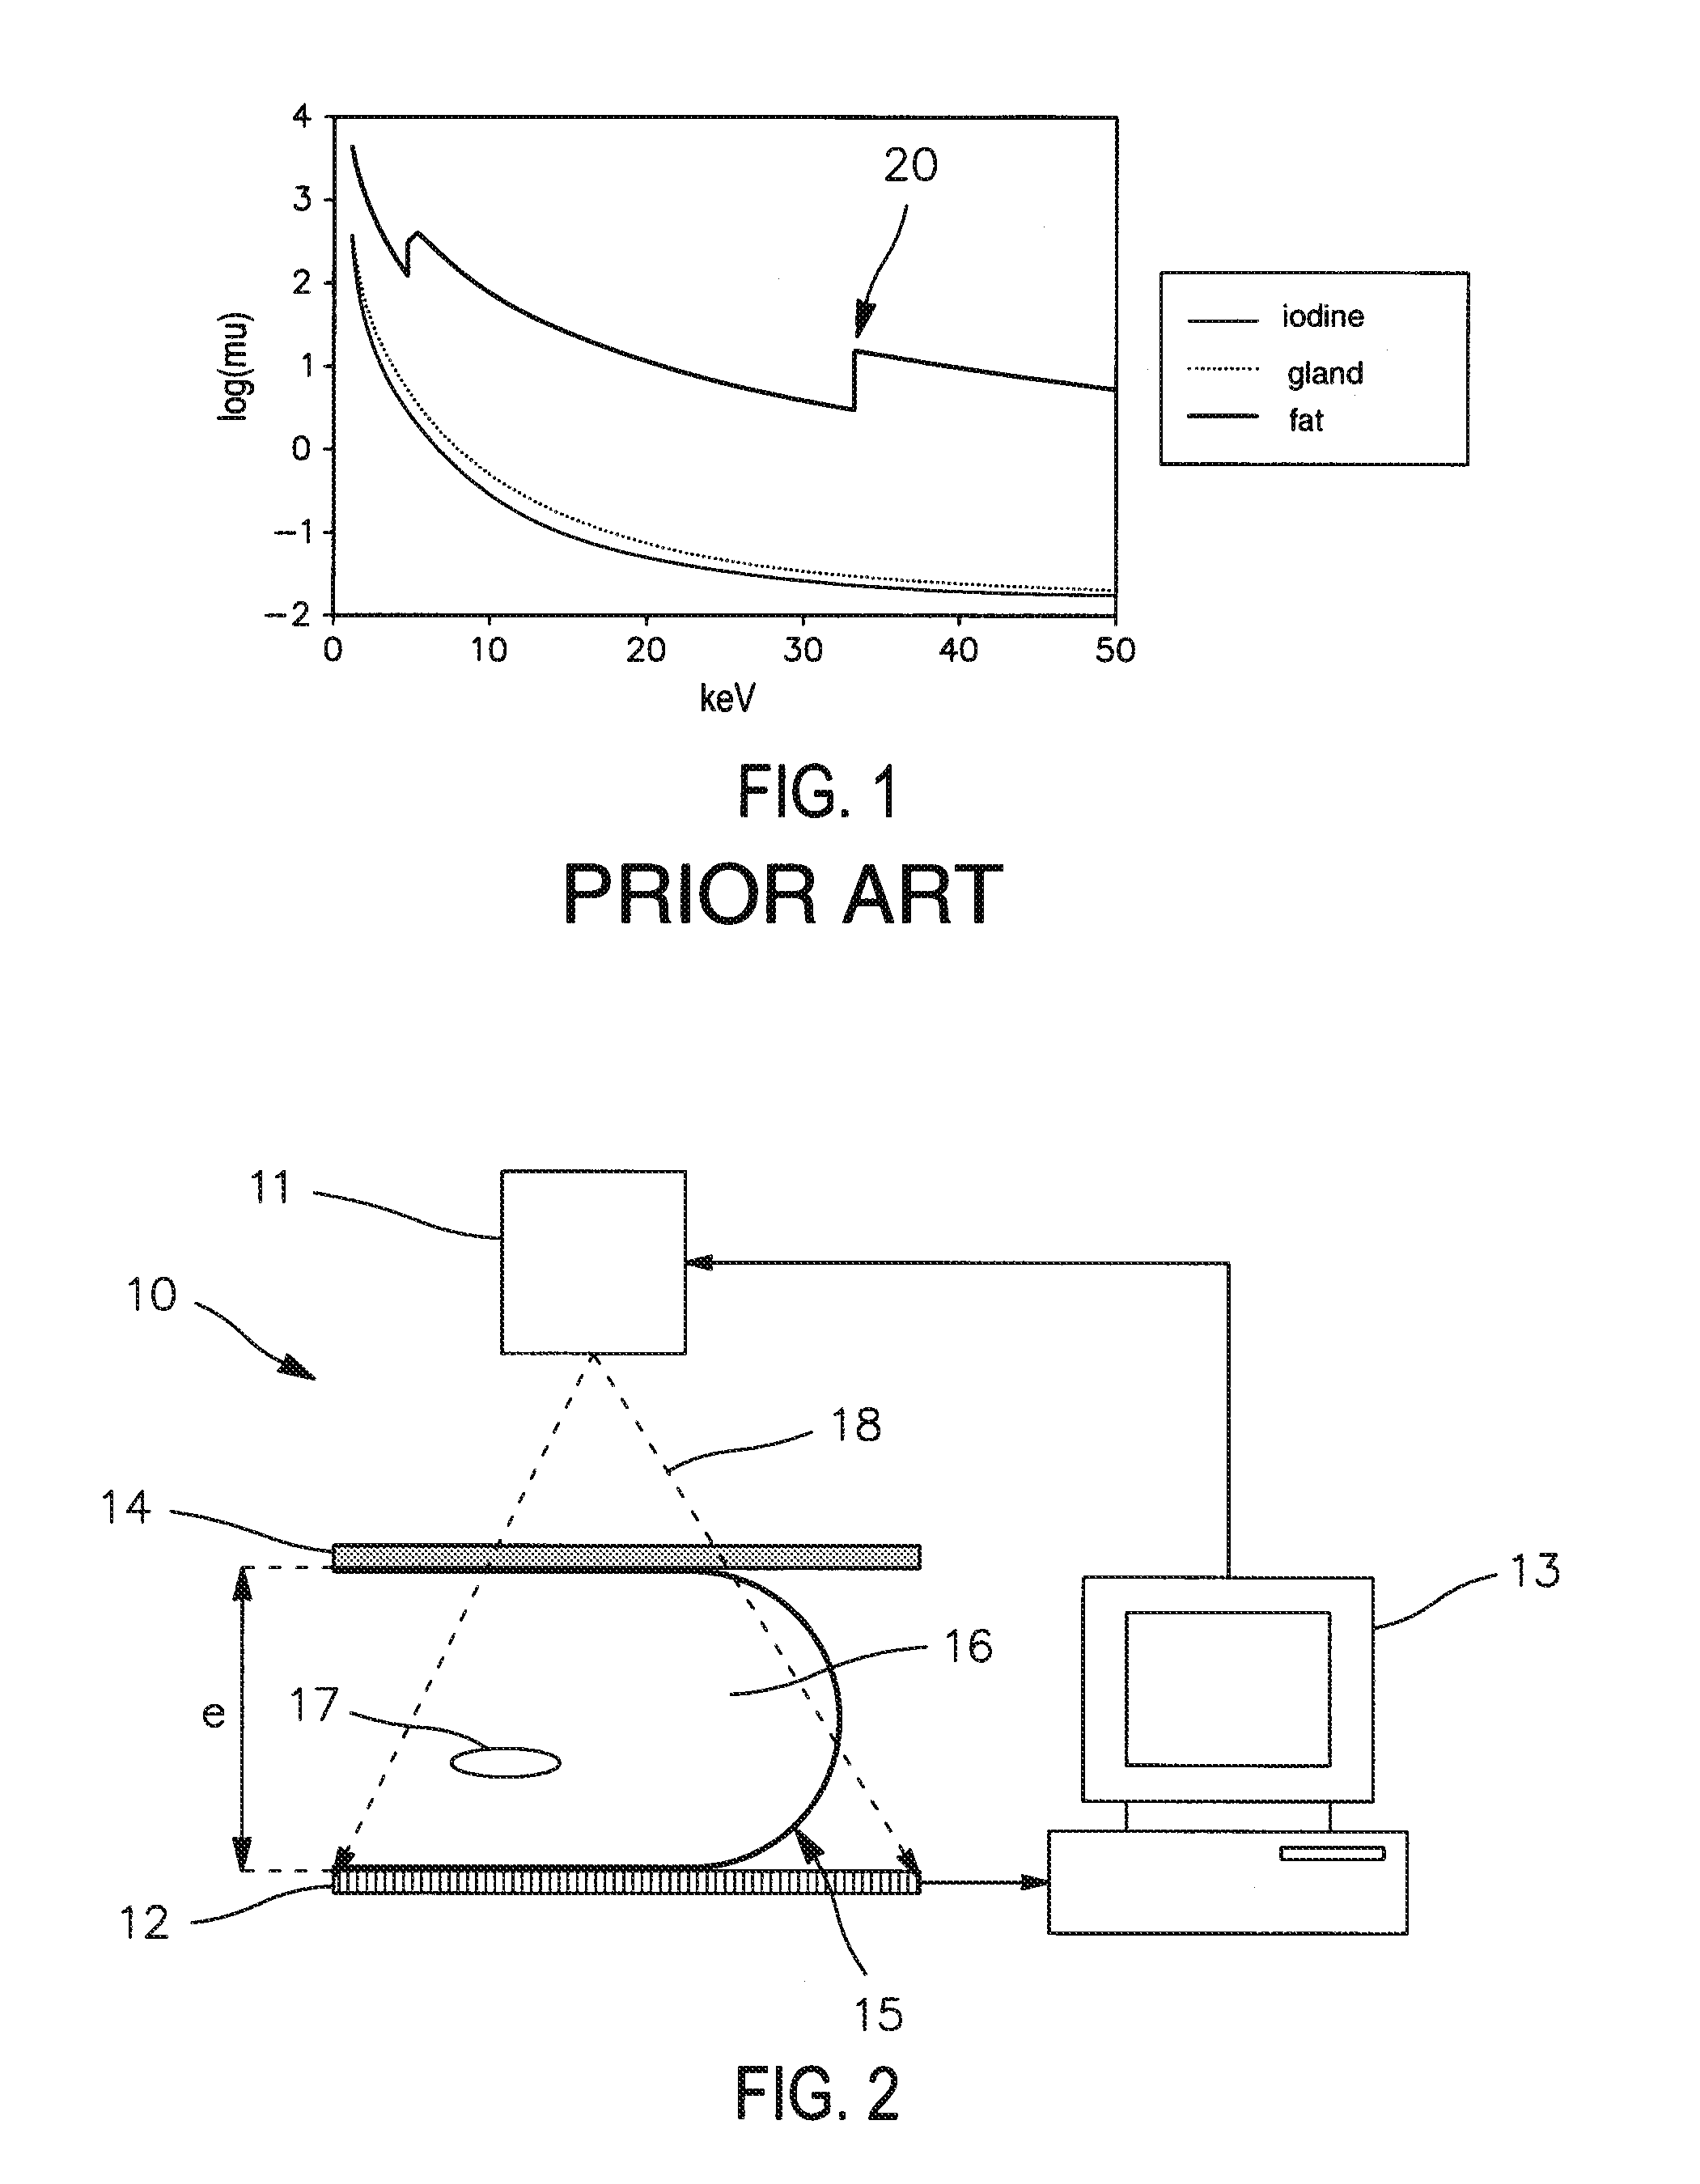 Method of processing radiological images, and, in particular, mammographic images